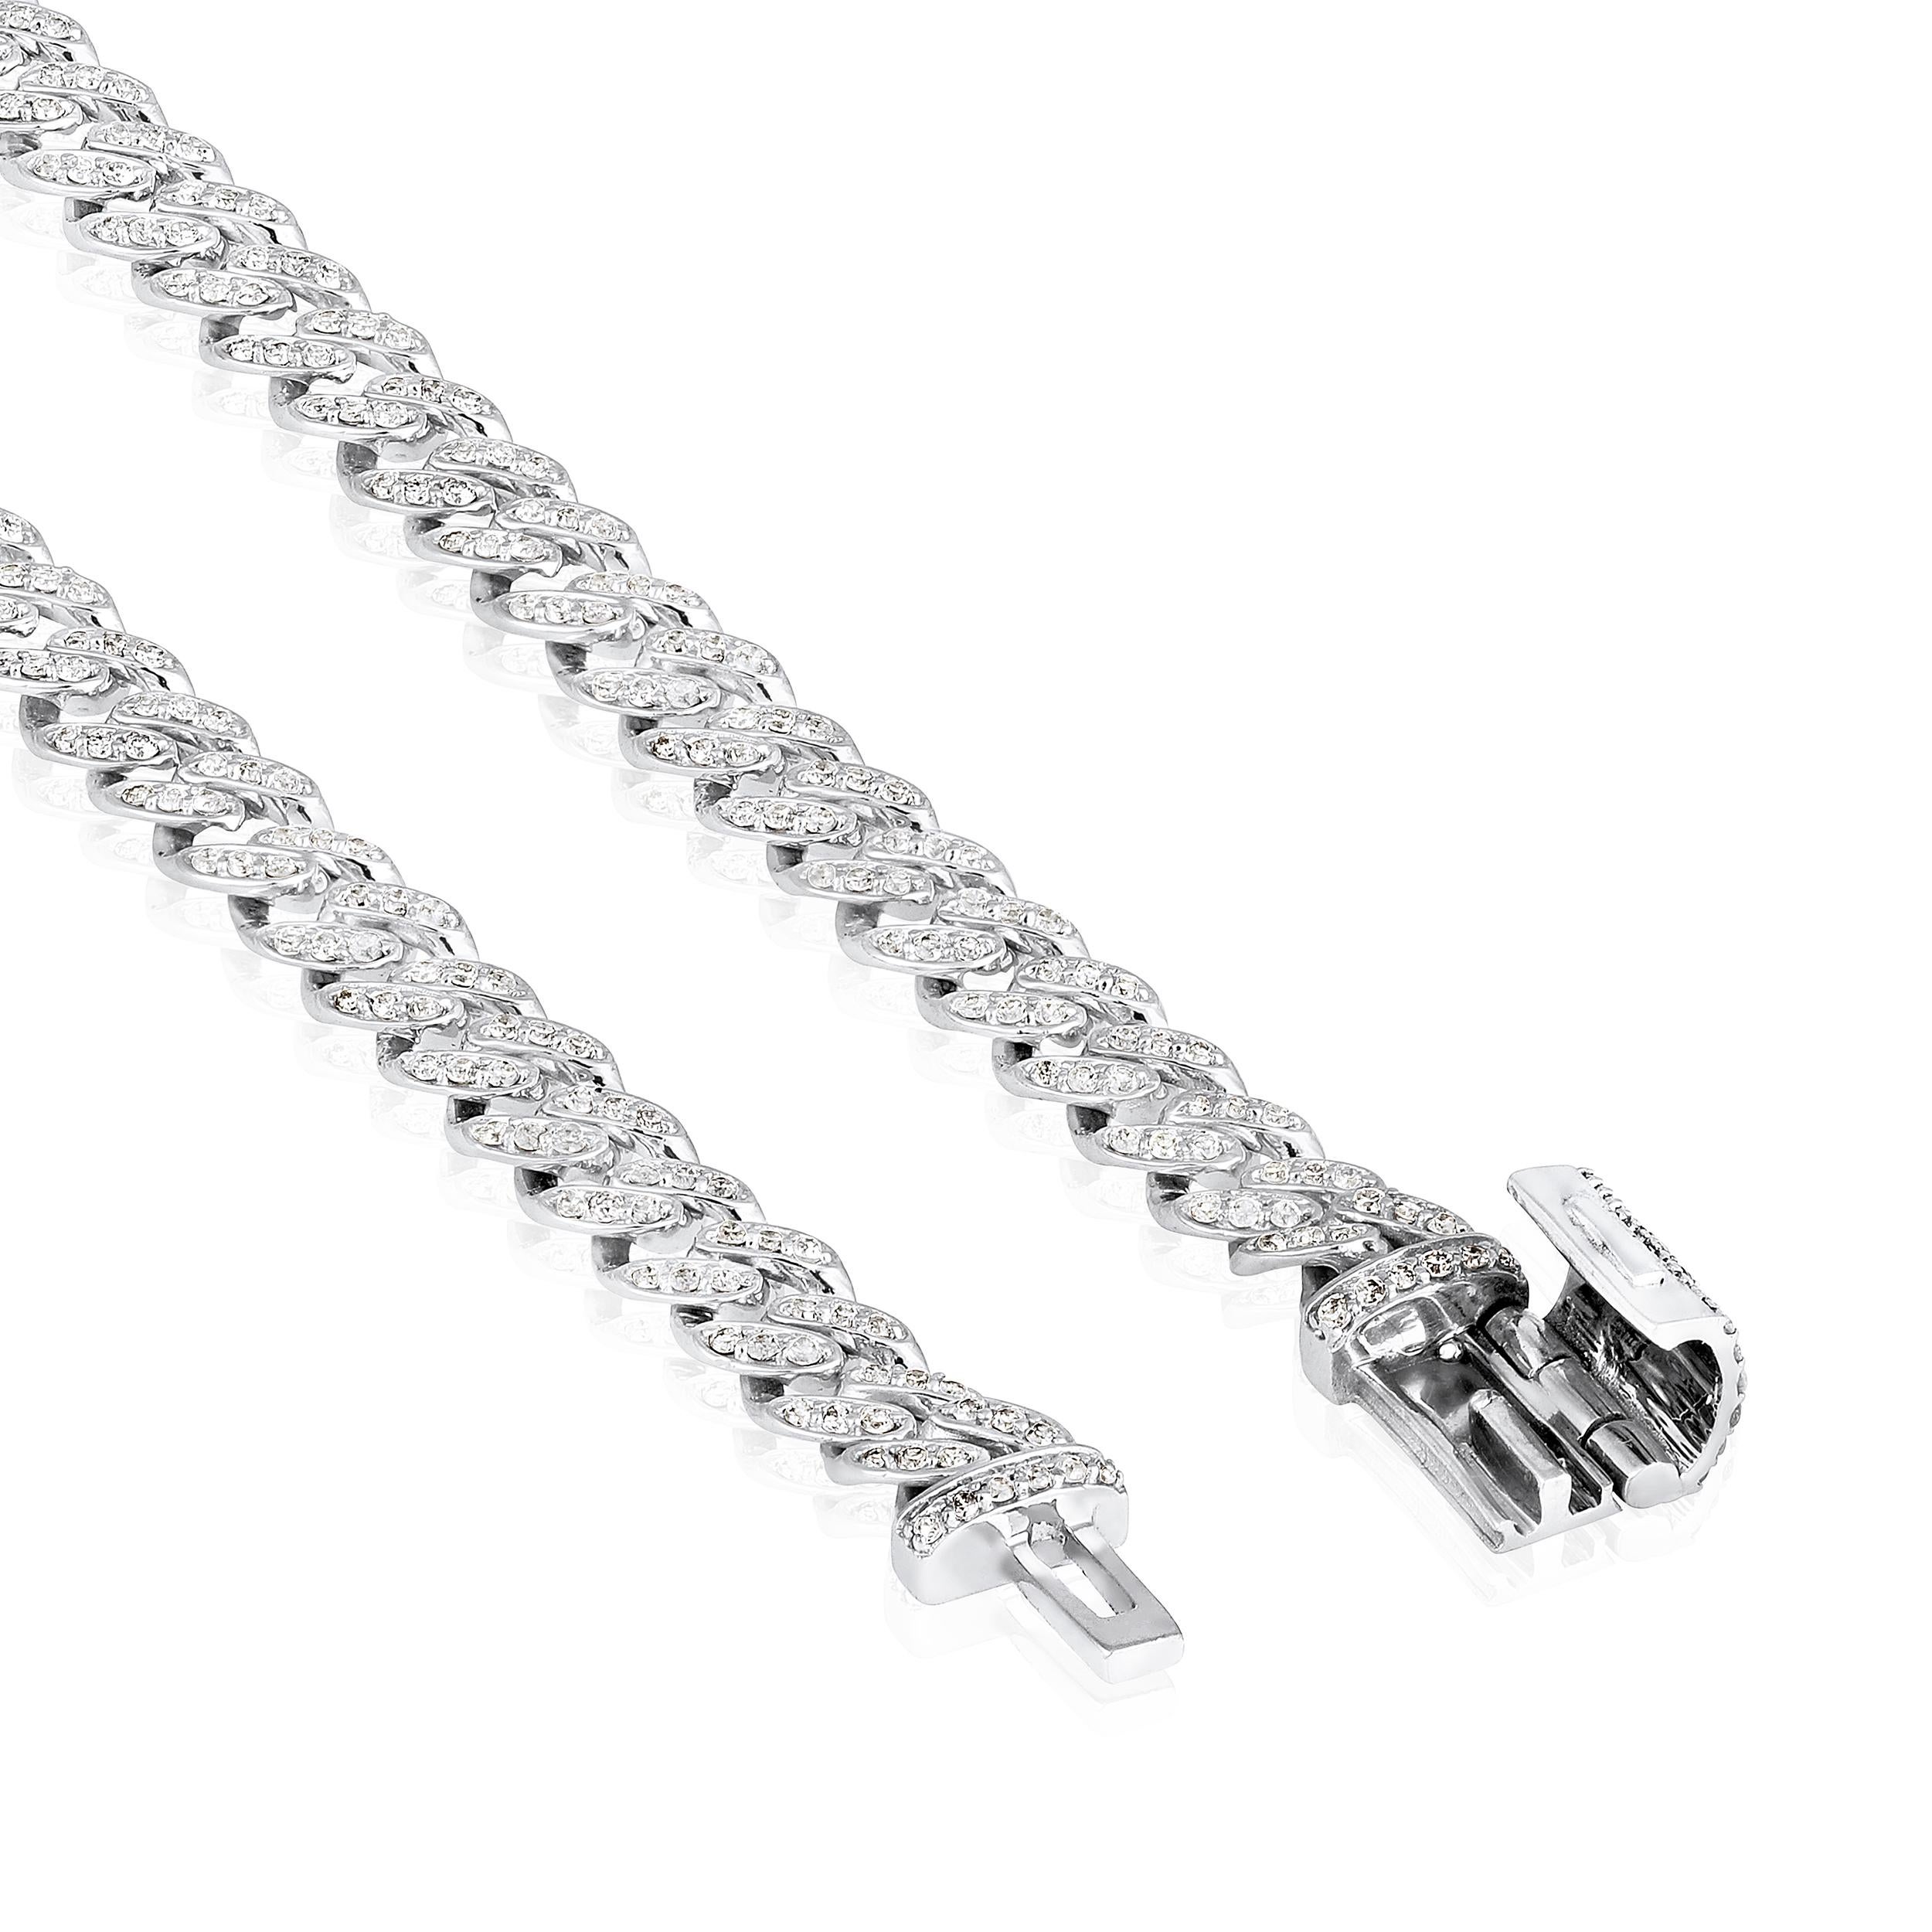 Crafted in 5.77 grams of 10K White Gold, the bracelet contains 432 stones of Round Diamonds with a total of 0.82 carat in F-G color and I1-I2 carat. The bracelet length is 7 inches.

This jewelry piece will be expertly crafted by our skilled